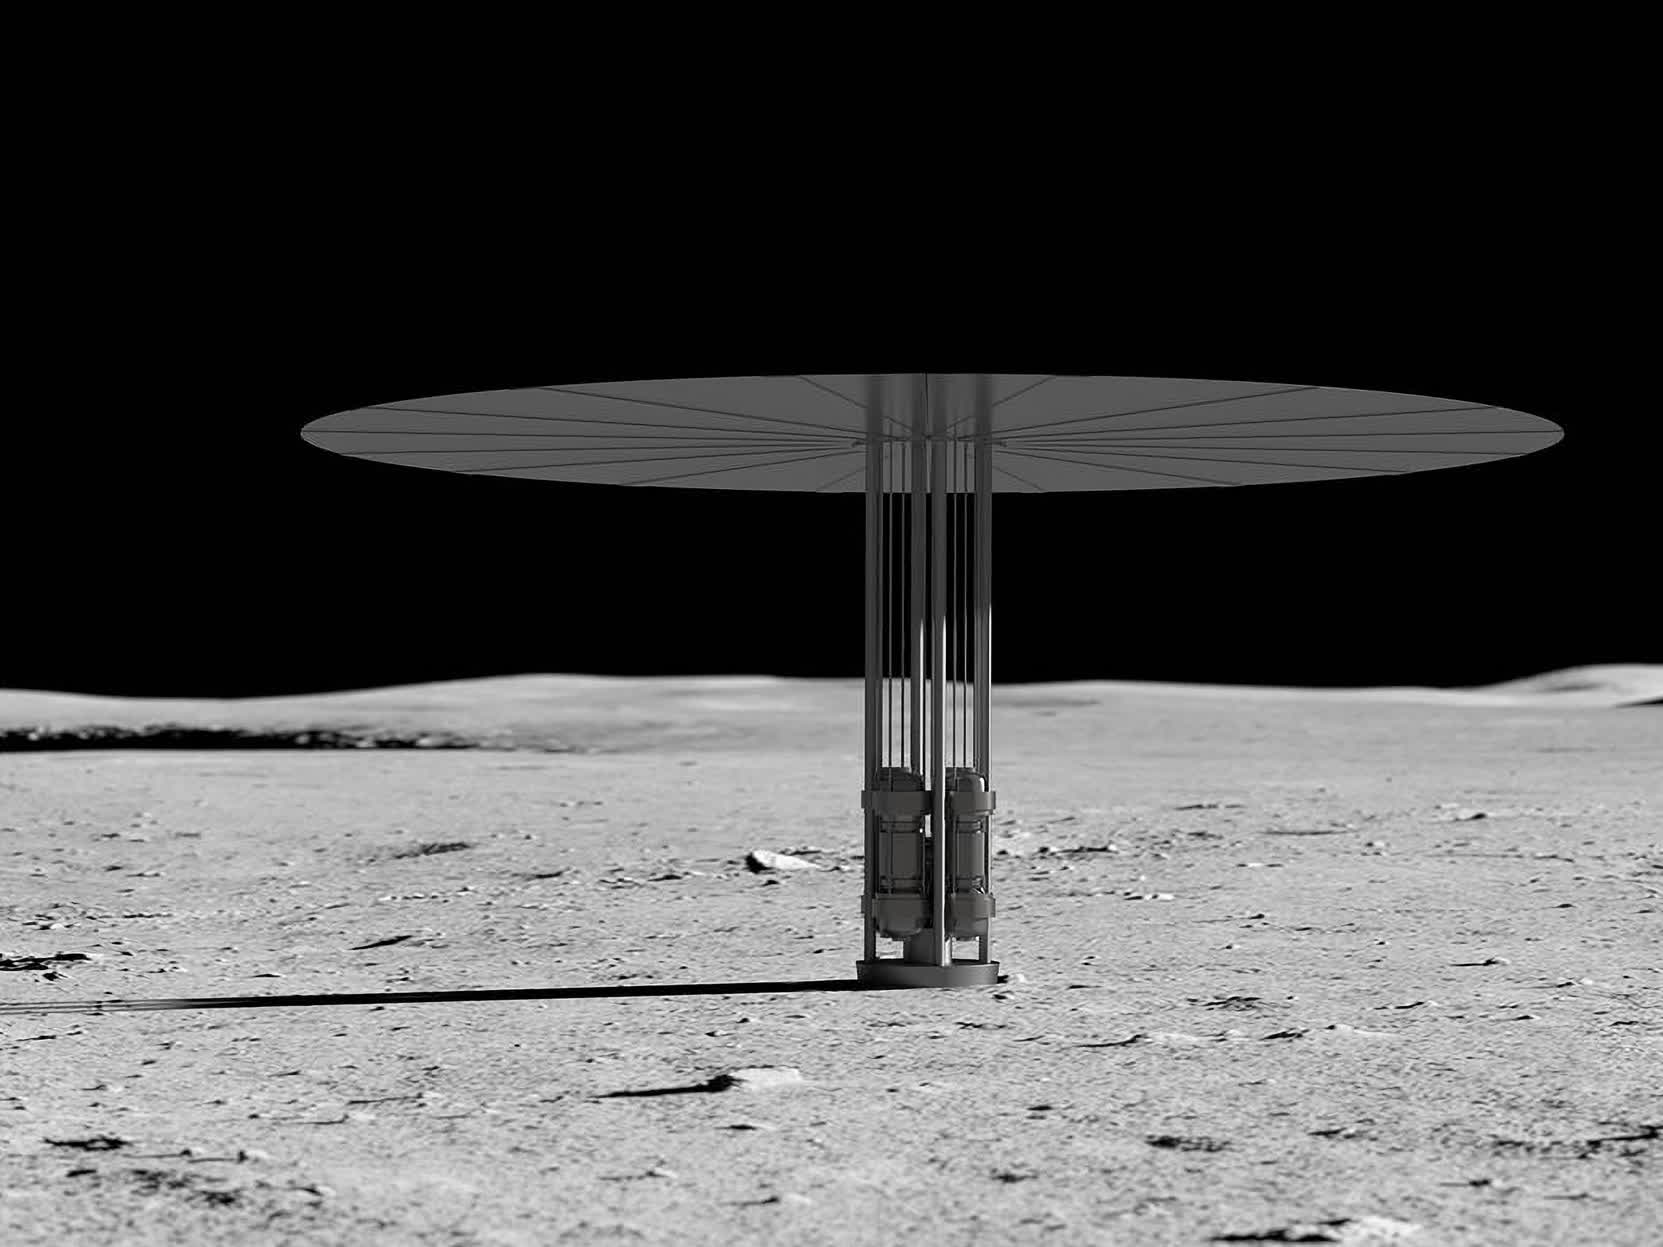 China and the US have plans for nuclear-powered moon bases